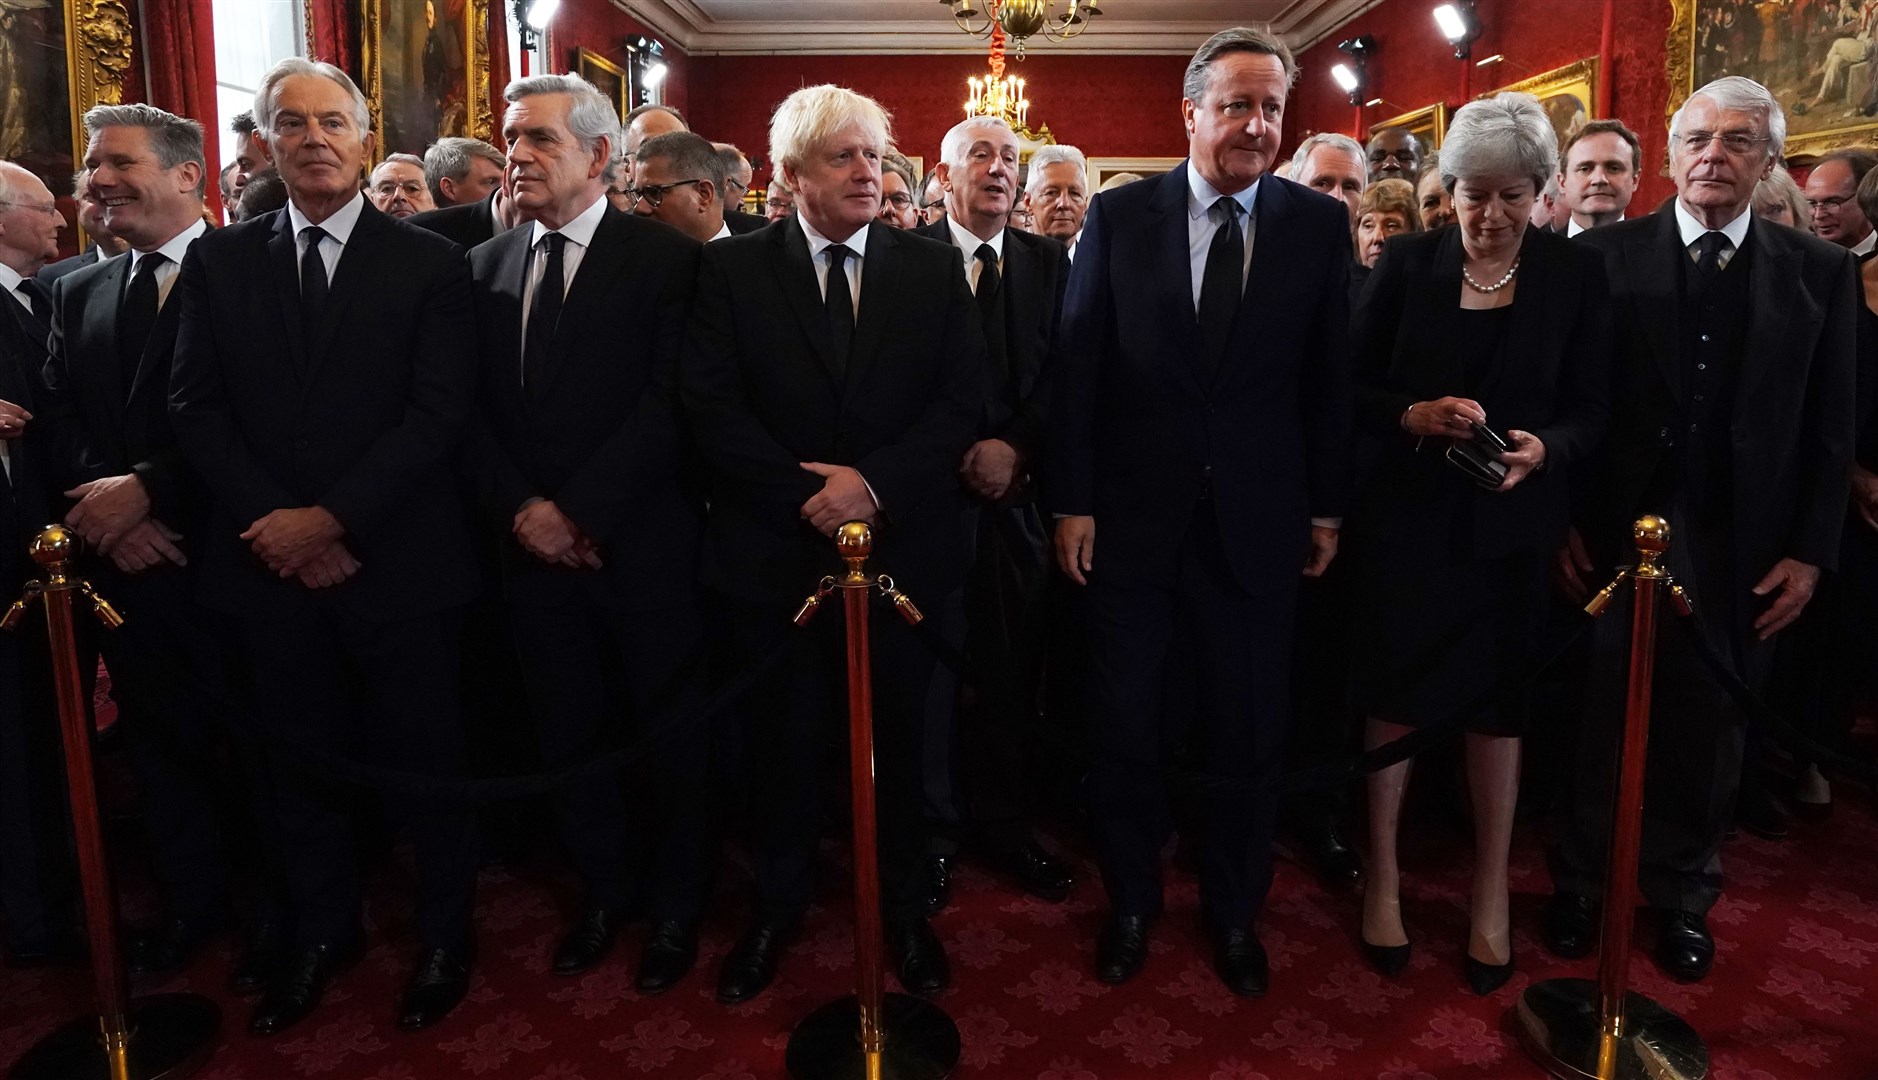 (Left-right front) Labour leader Sir Keir Starmer, former prime ministers Sir Tony Blair, Gordon Brown, Boris Johnson, David Cameron, Theresa May and Sir John Major ahead of the Accession Council ceremony at St James’s Palace, London, where King Charles III was formally proclaimed monarch (Kirsty O’Connor/PA)